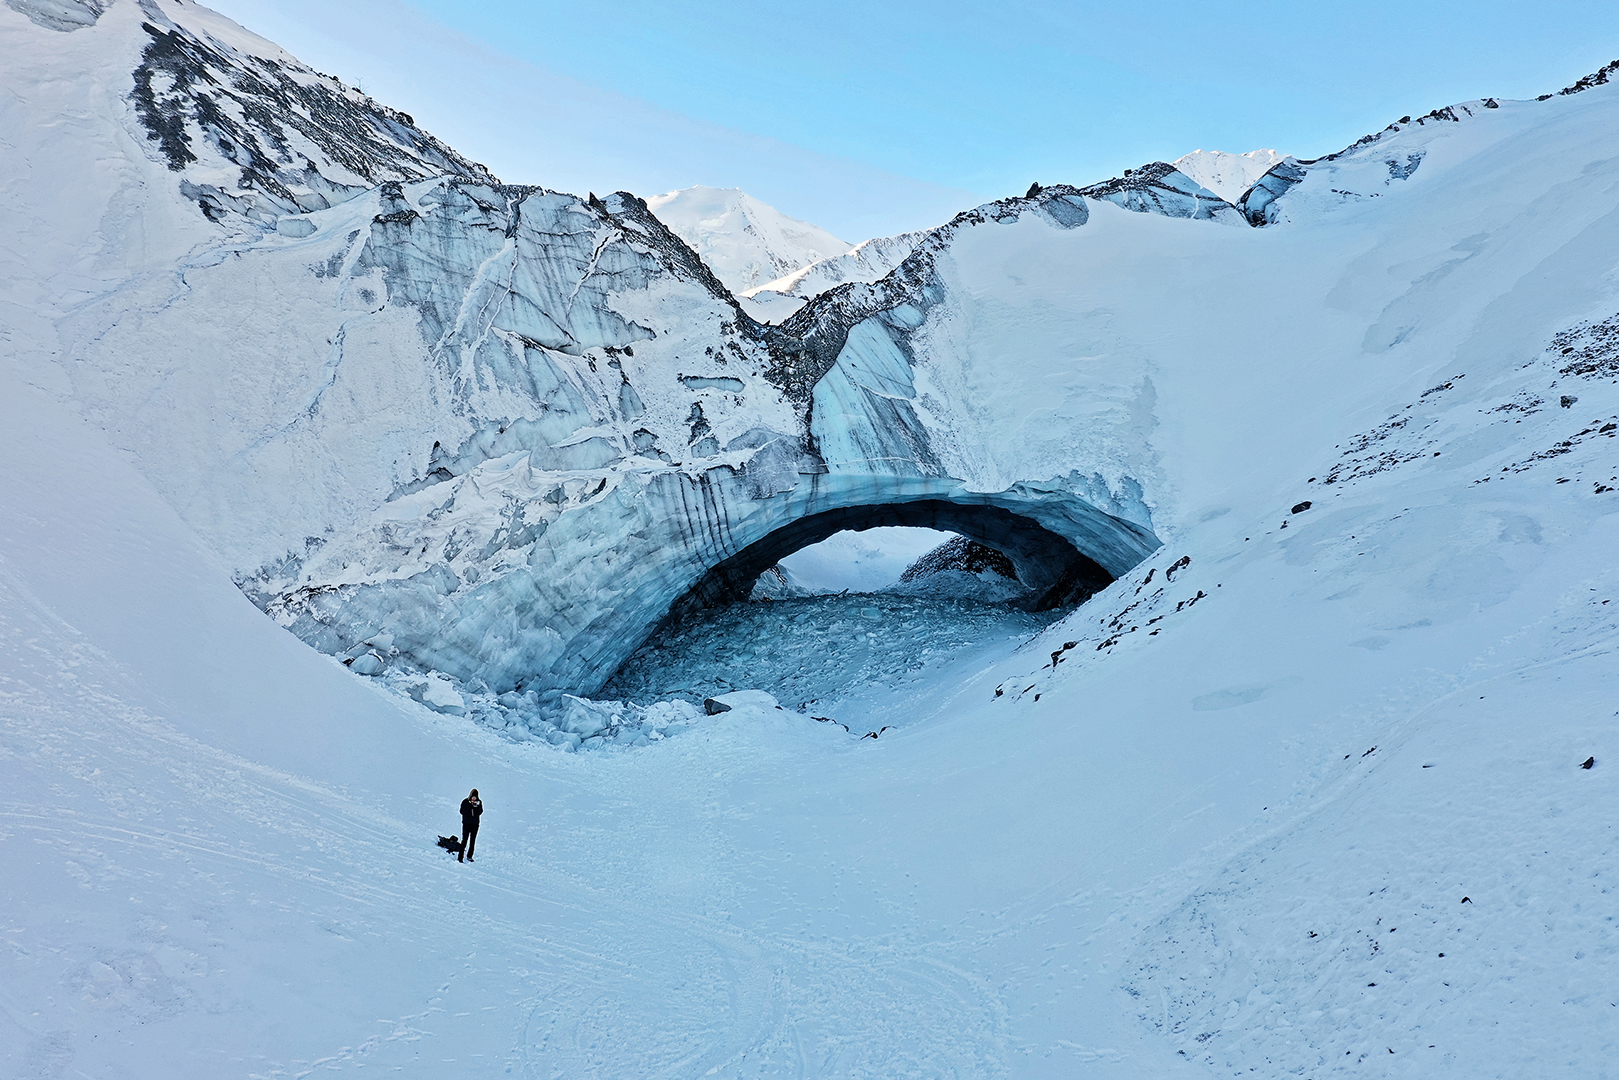 Ice cave near Haines Junction